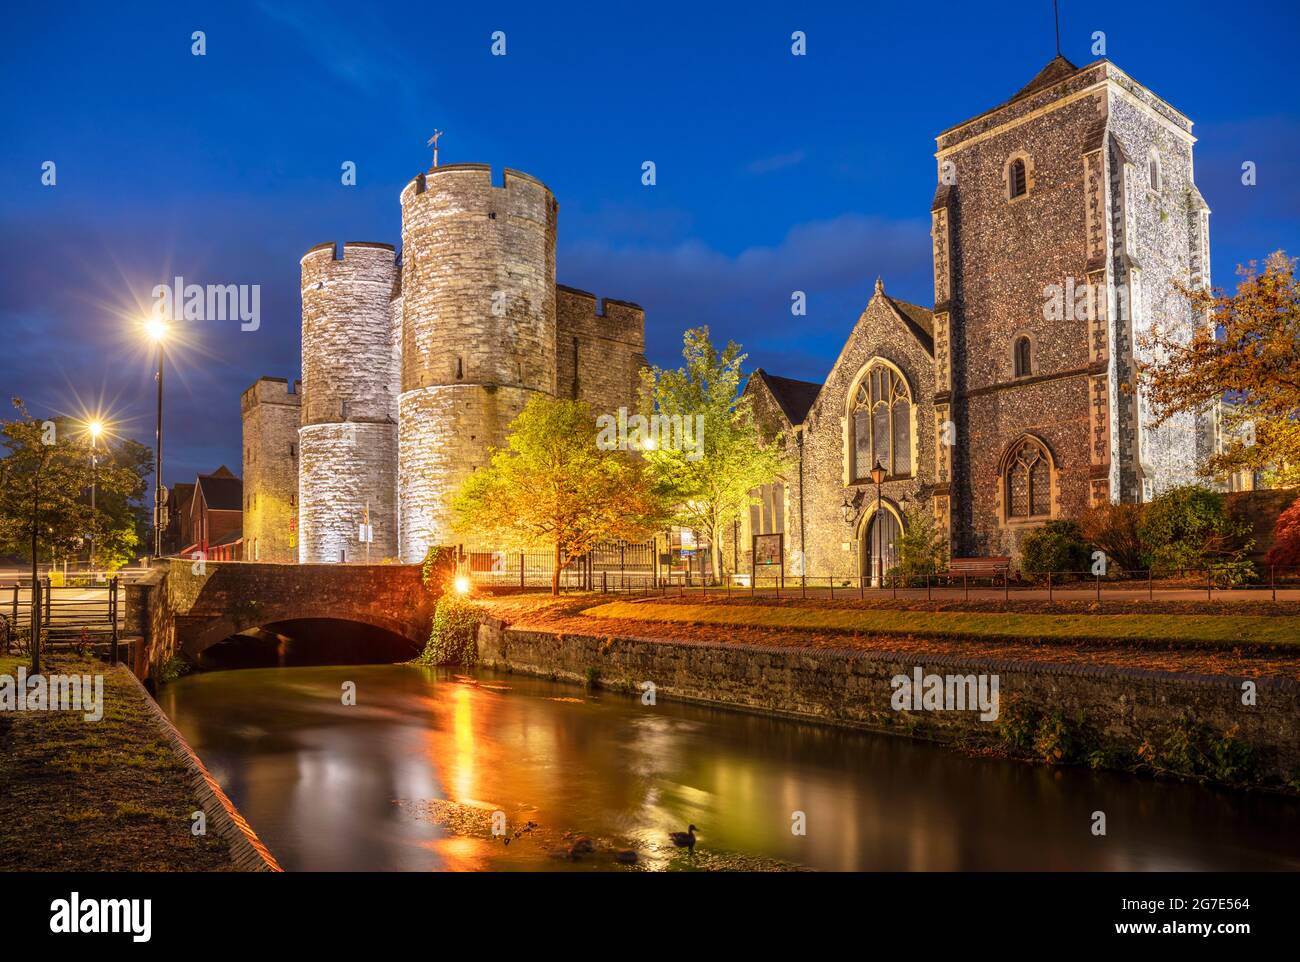 Westgate Towers medieval gateway Westgate Gardens and Great Stour River at night Canterbury Kent England UK GB Europe Stock Photo